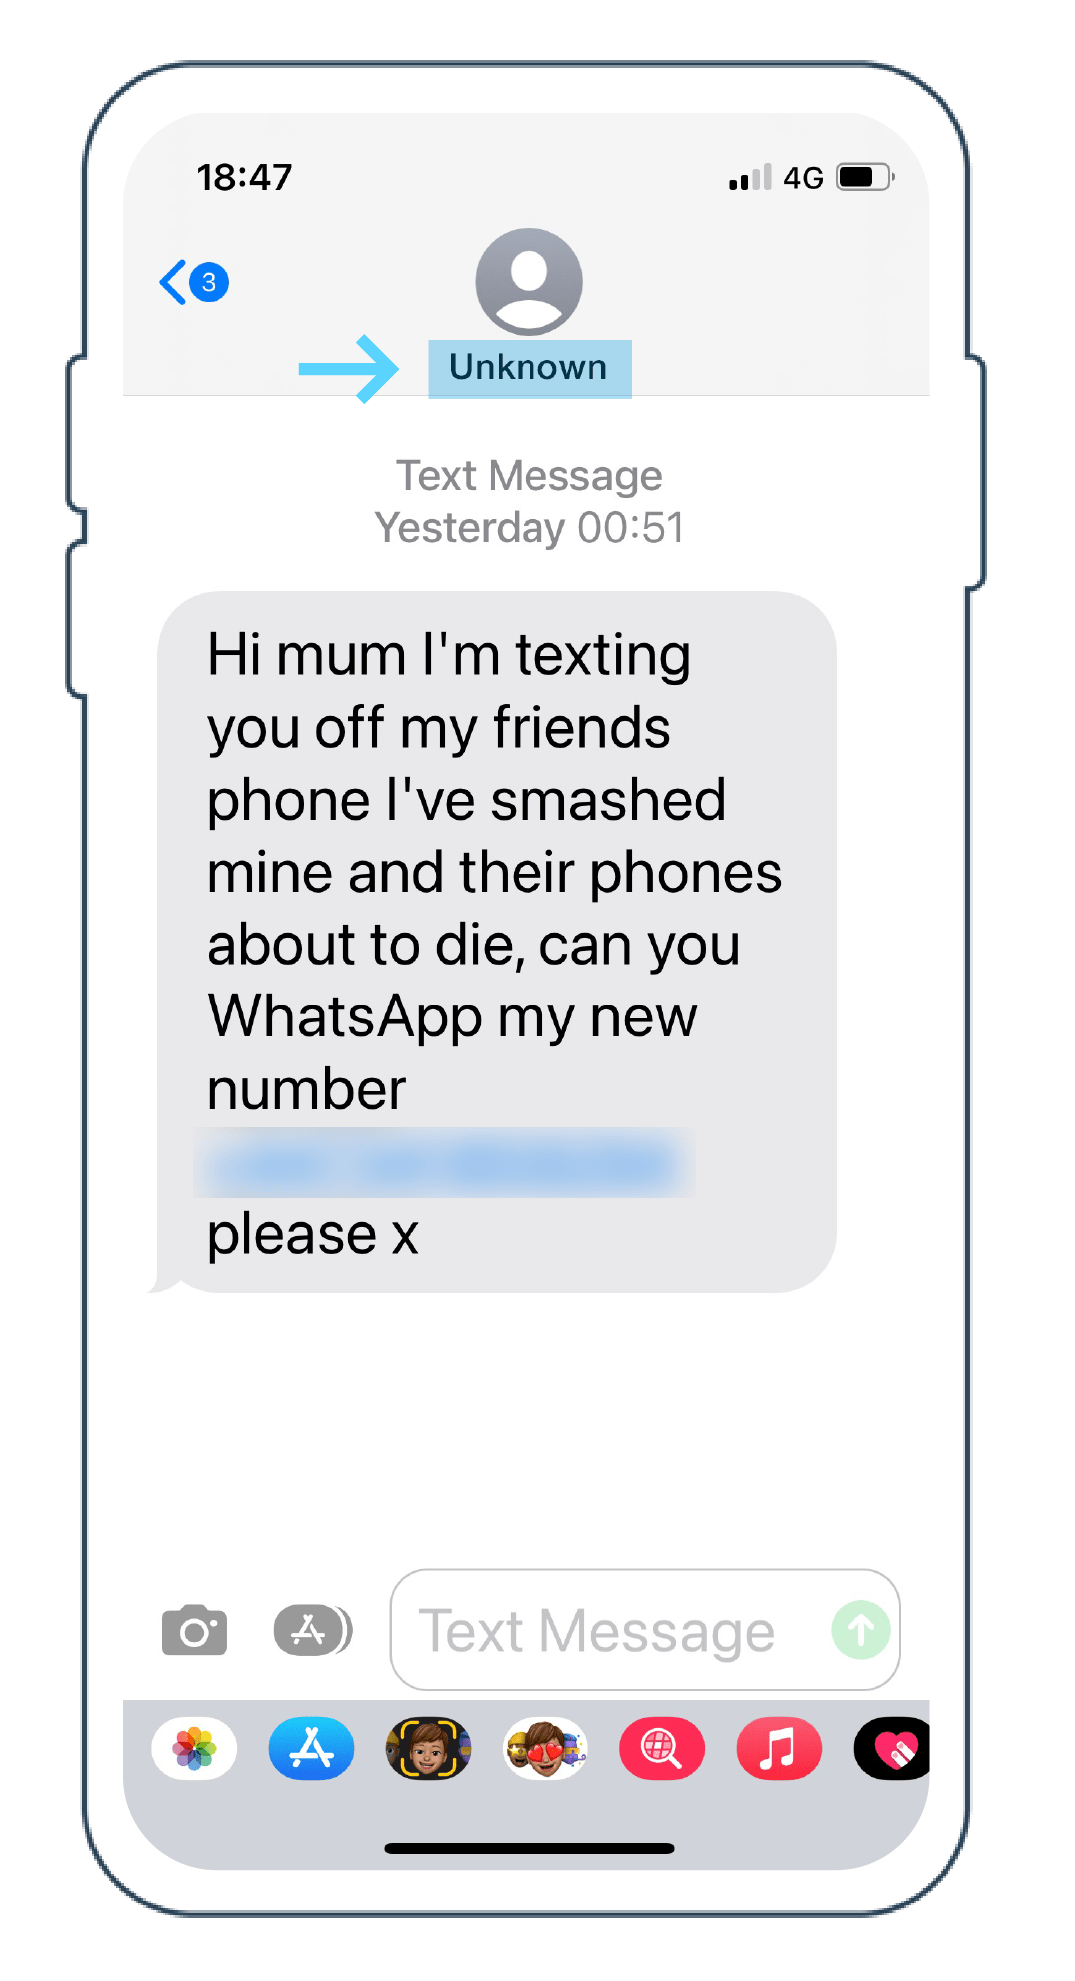 Scam message highlighting an unknown number